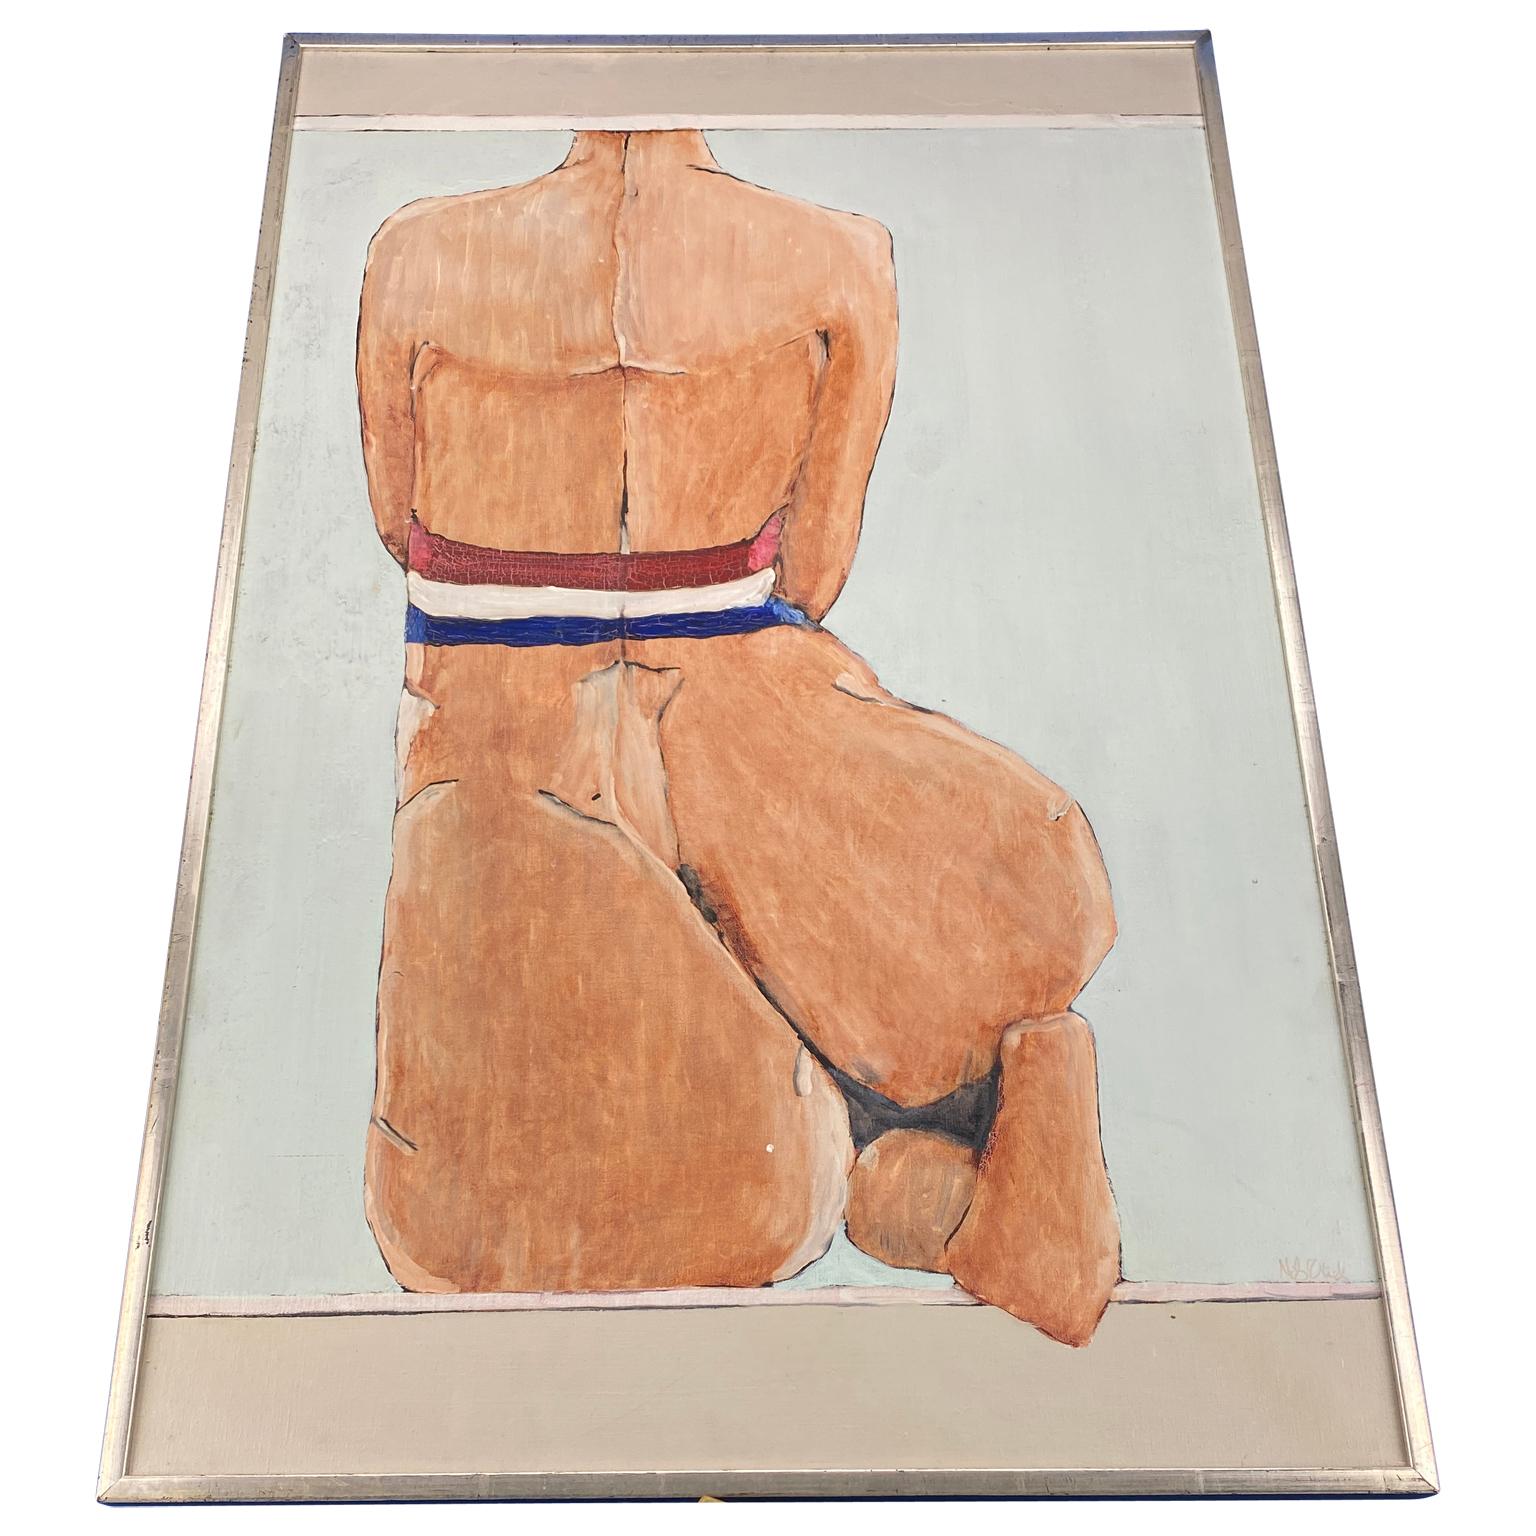 Modern French nude oil on canvas painting with tricolor wrapping in silver-gilded frame
Dated 1973, unclear signature, please see detailed images.